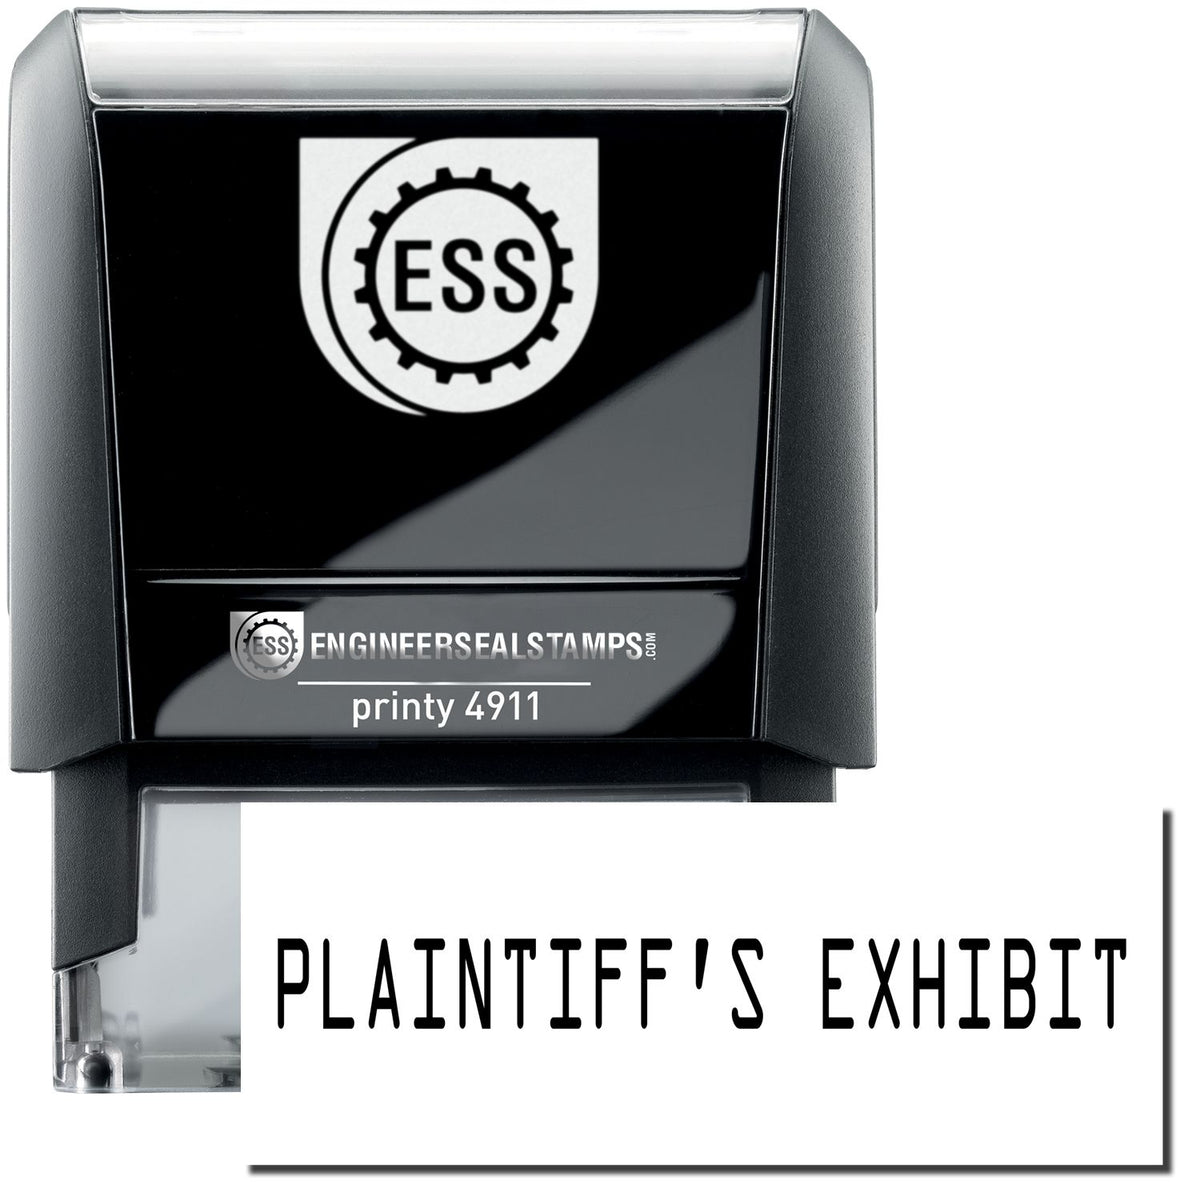 A self-inking stamp with a stamped image showing how the text &quot;PLAINTIFF&#39;S EXHIBIT&quot; is displayed after stamping.